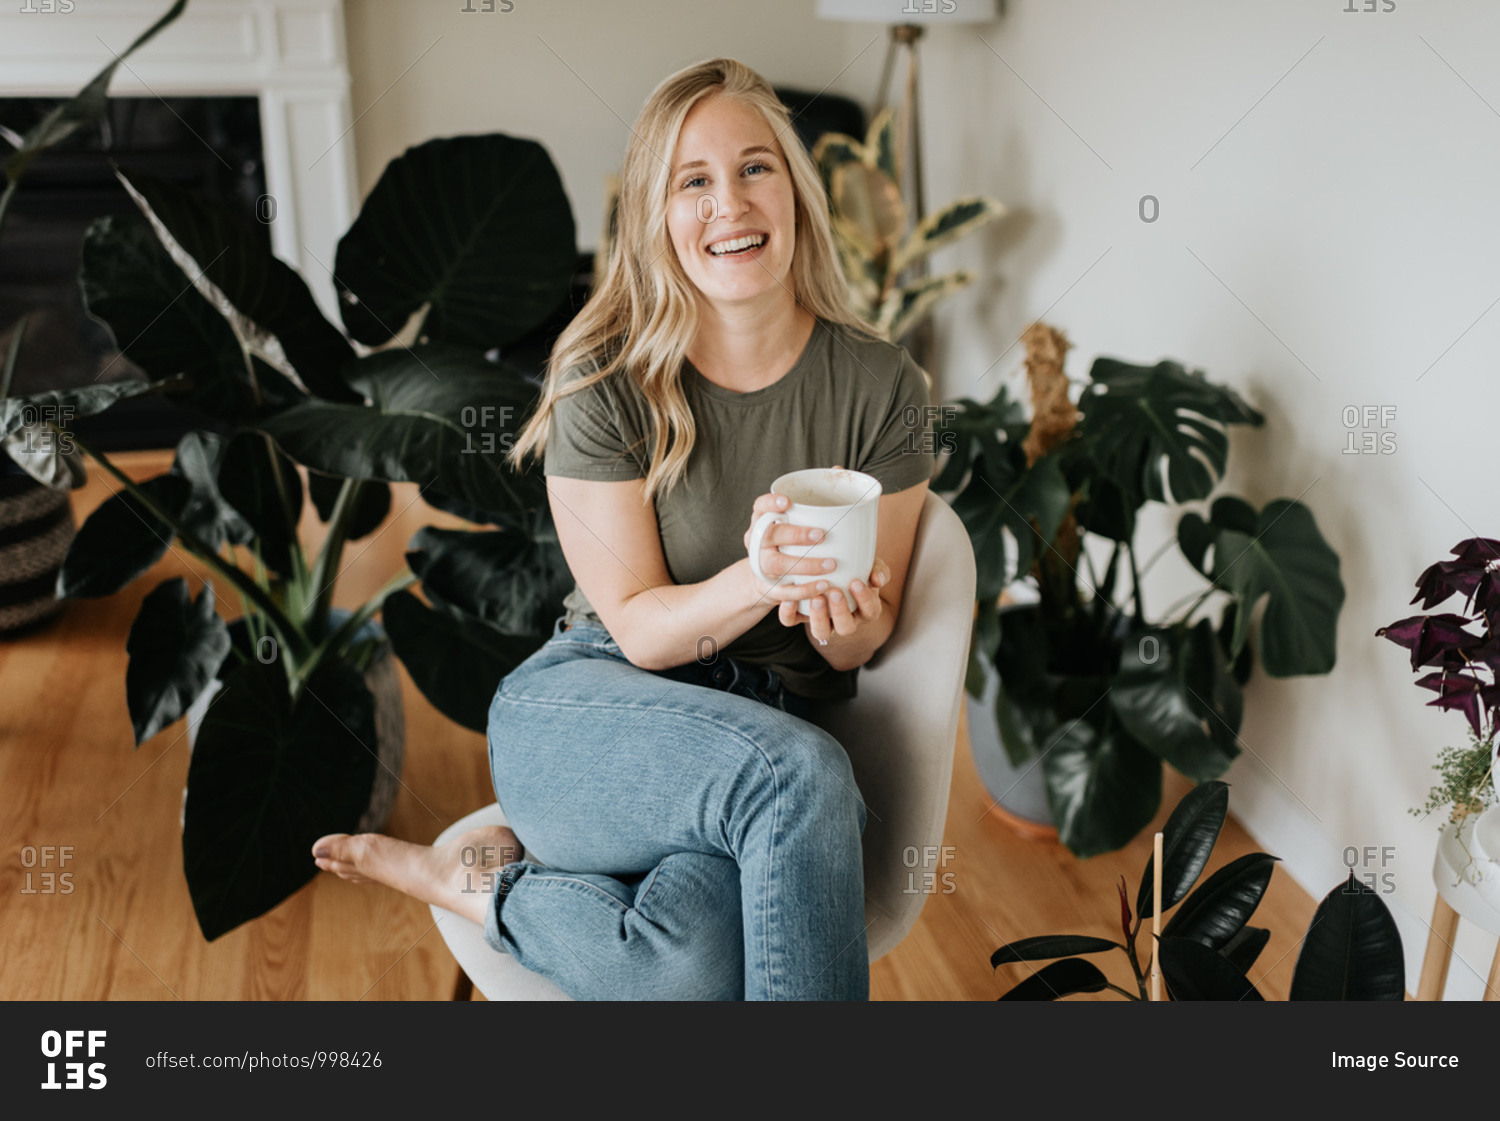 Woman relaxing with warm beverage in room full of house plants